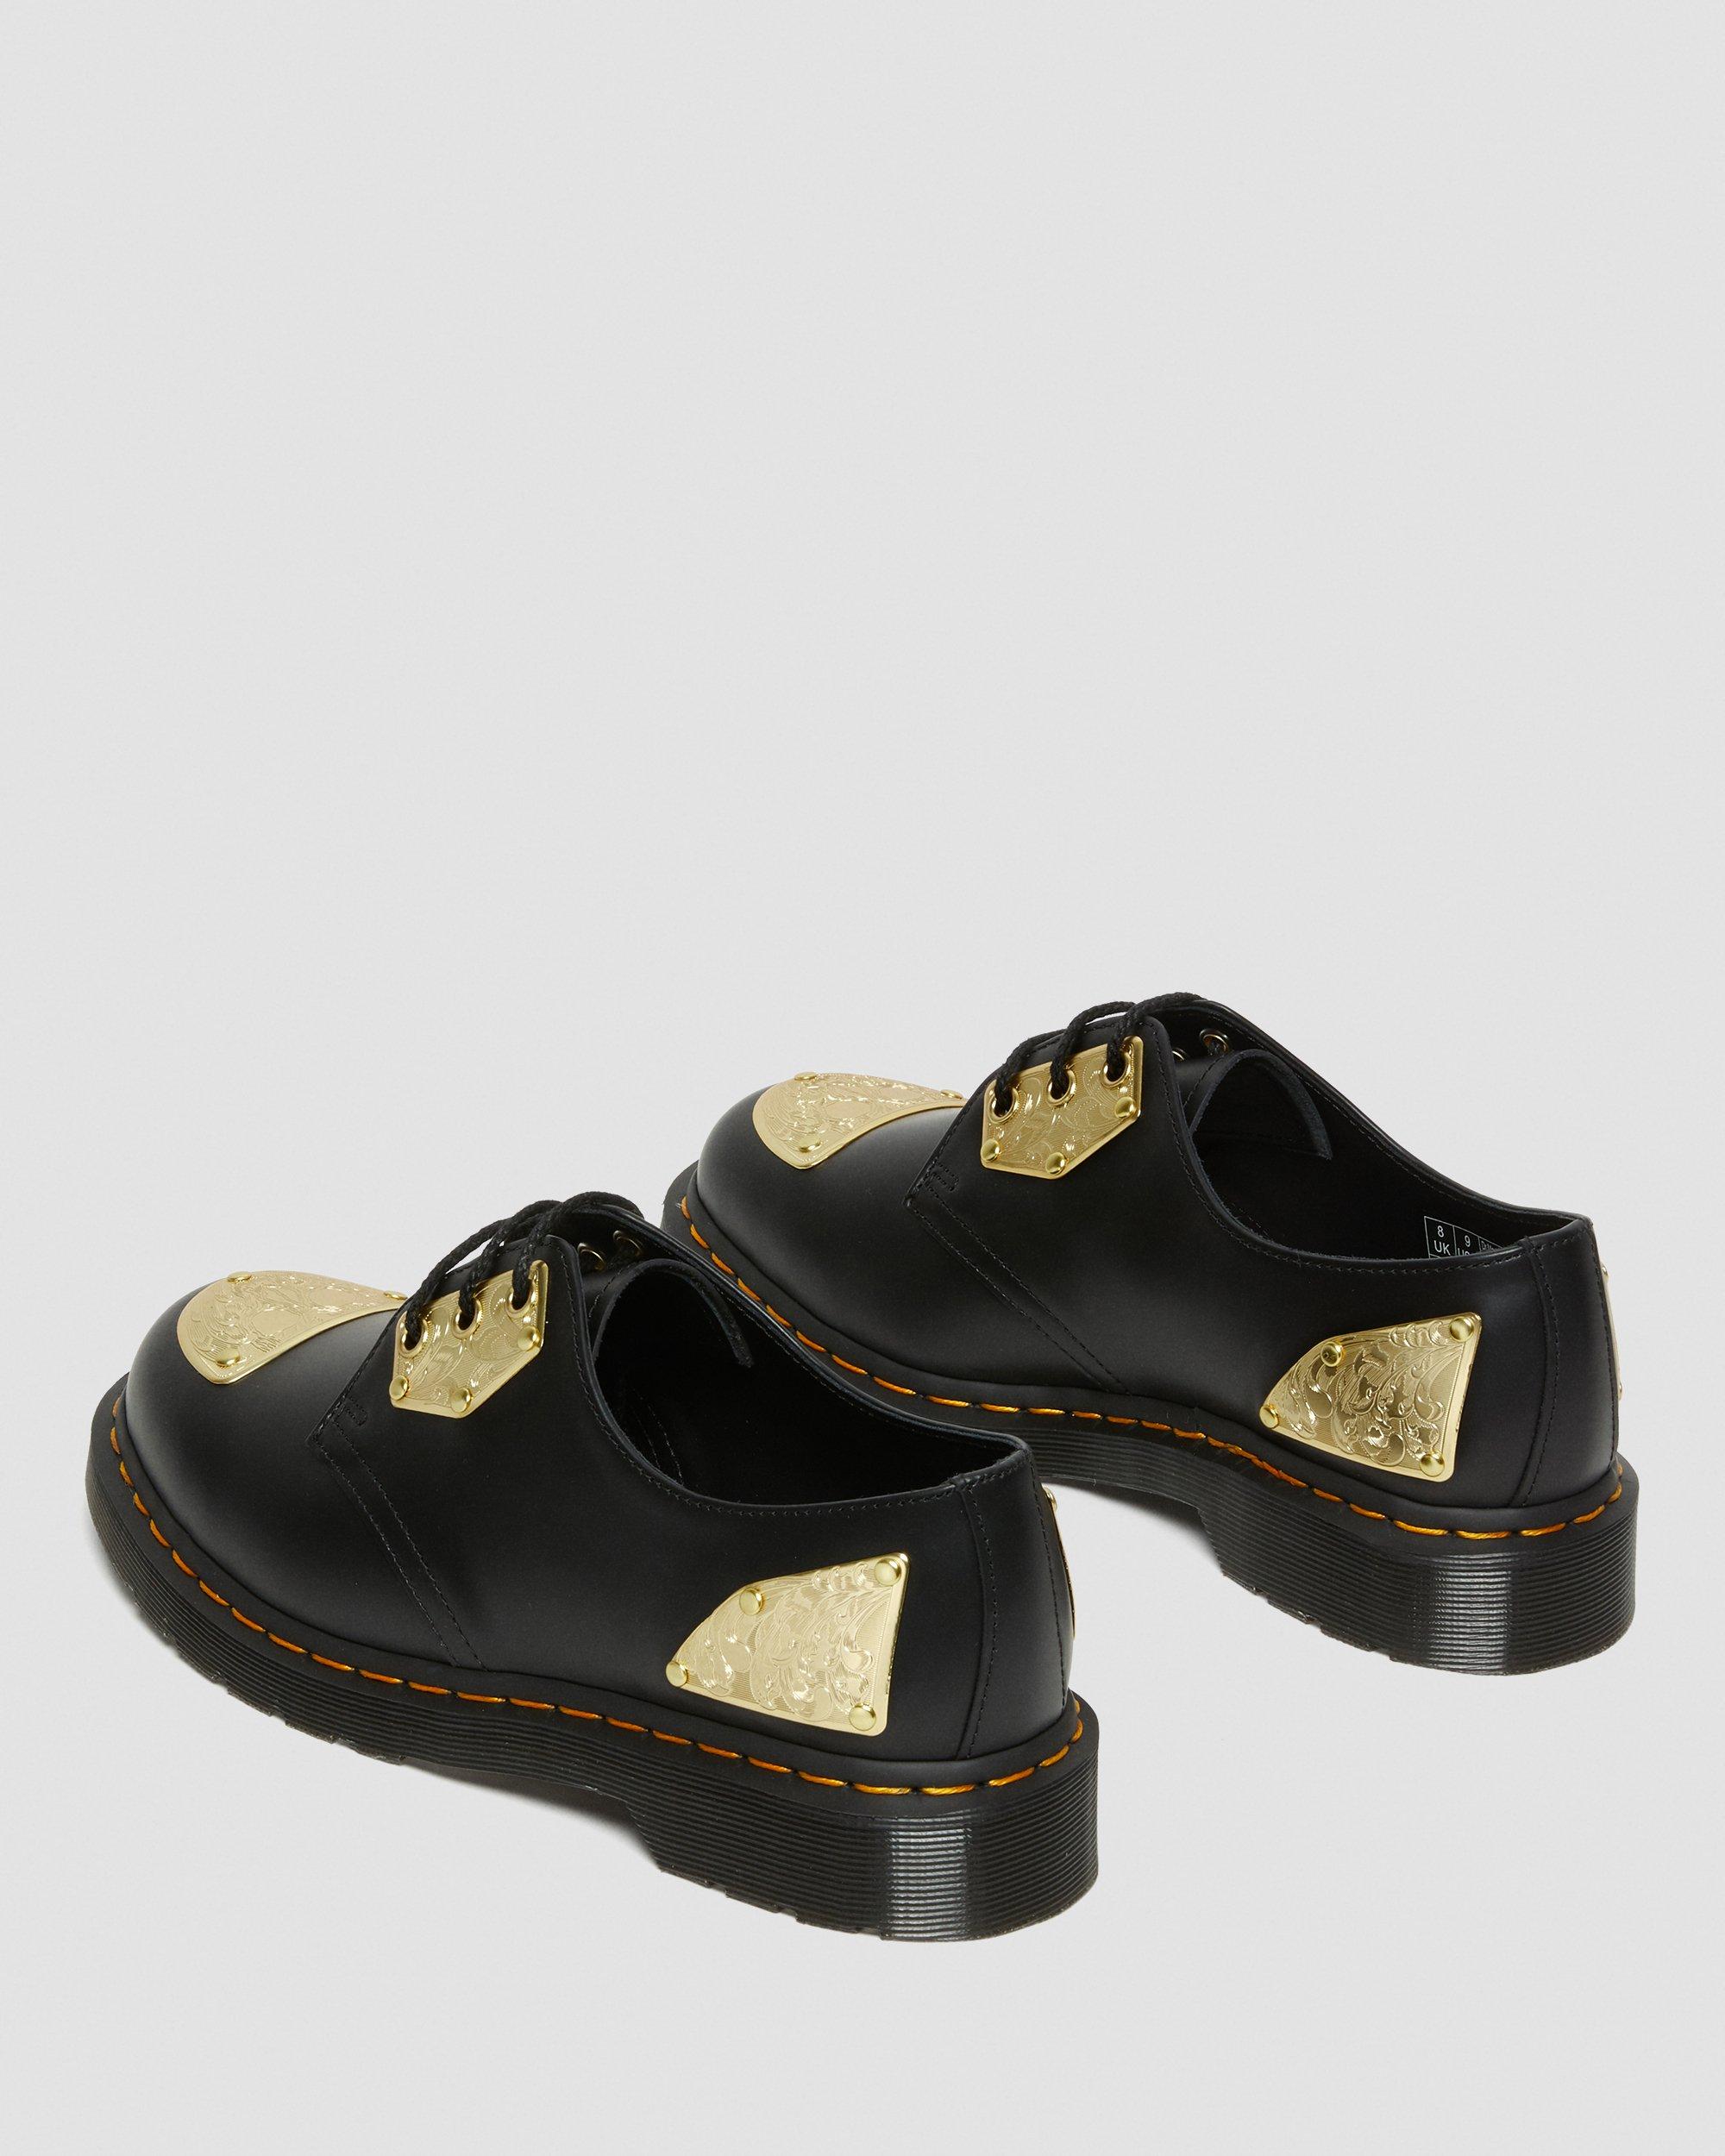 King Nerd 1461 Leather Oxford Shoes | Dr. Martens